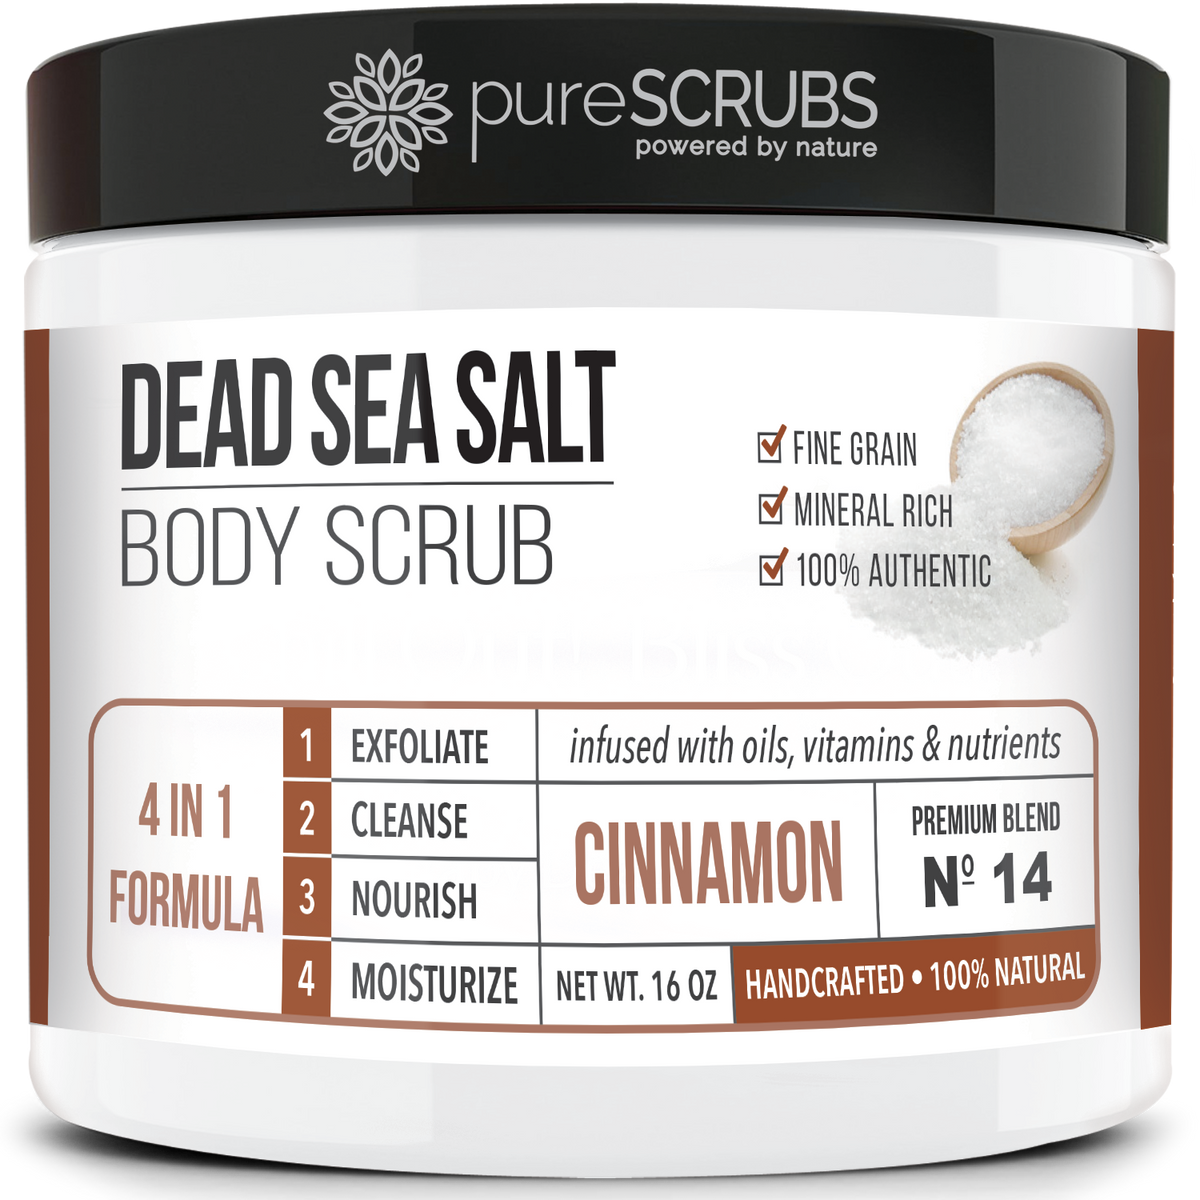 purescrubs Premium Blend #14 cinnamon dead sea salt body scrub to exfoliate your skin comes with free loofah pad free exfoliating organic oatmeal bar soap shea butter and honey and free eco-friendly bamboo spoon to stir and scoop out the scrub 